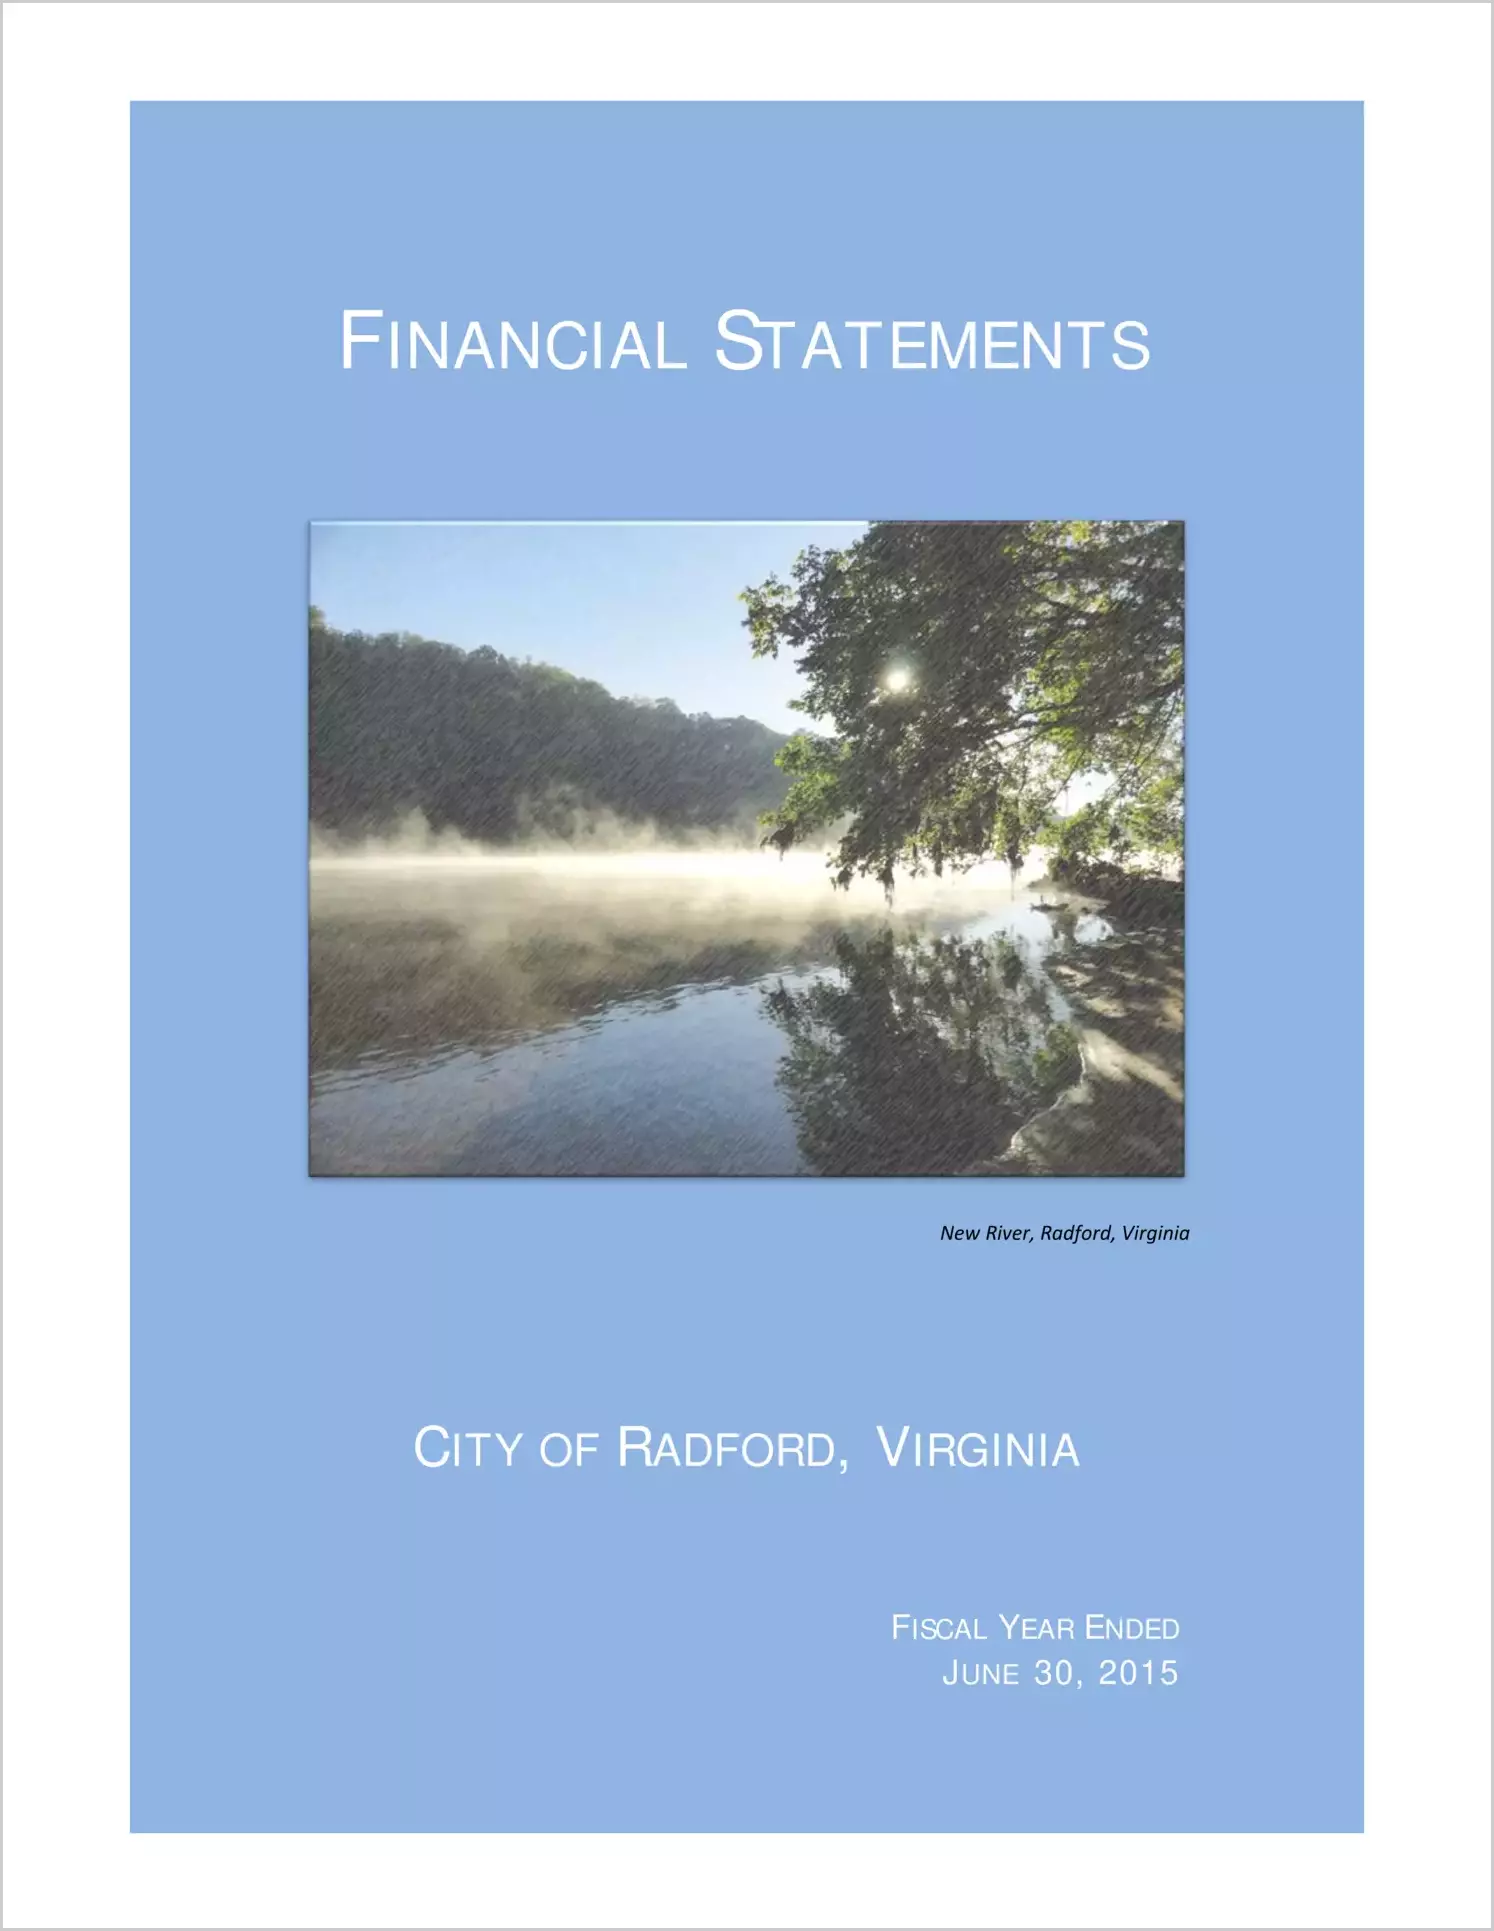 2015 Annual Financial Report for City of Radford